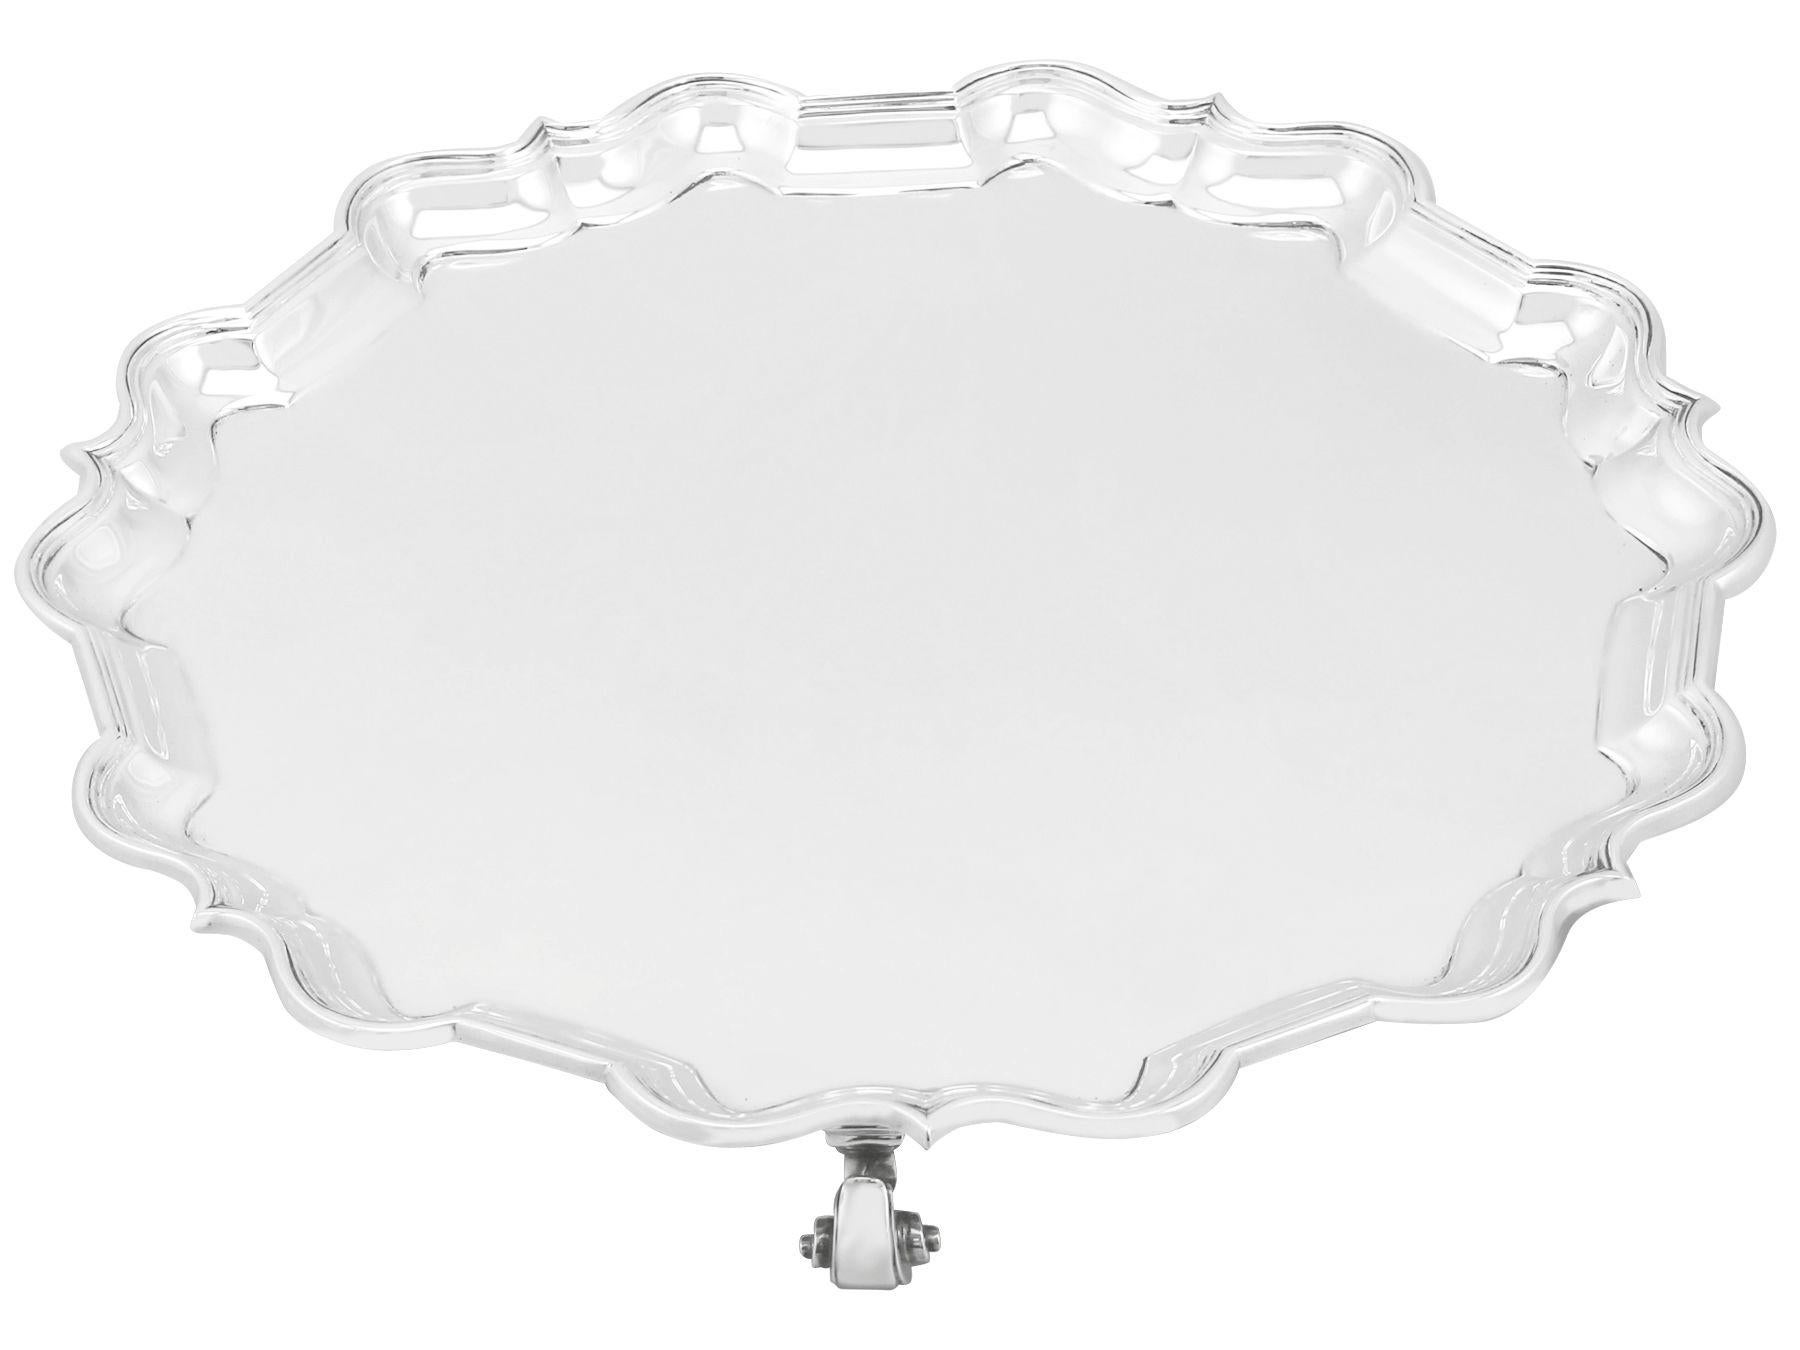 An exceptional, fine and impressive antique George V English sterling silver salver; an addition to our silver dining collection

This exceptional antique George V sterling silver salver has a circular shaped form.

The surface of this large